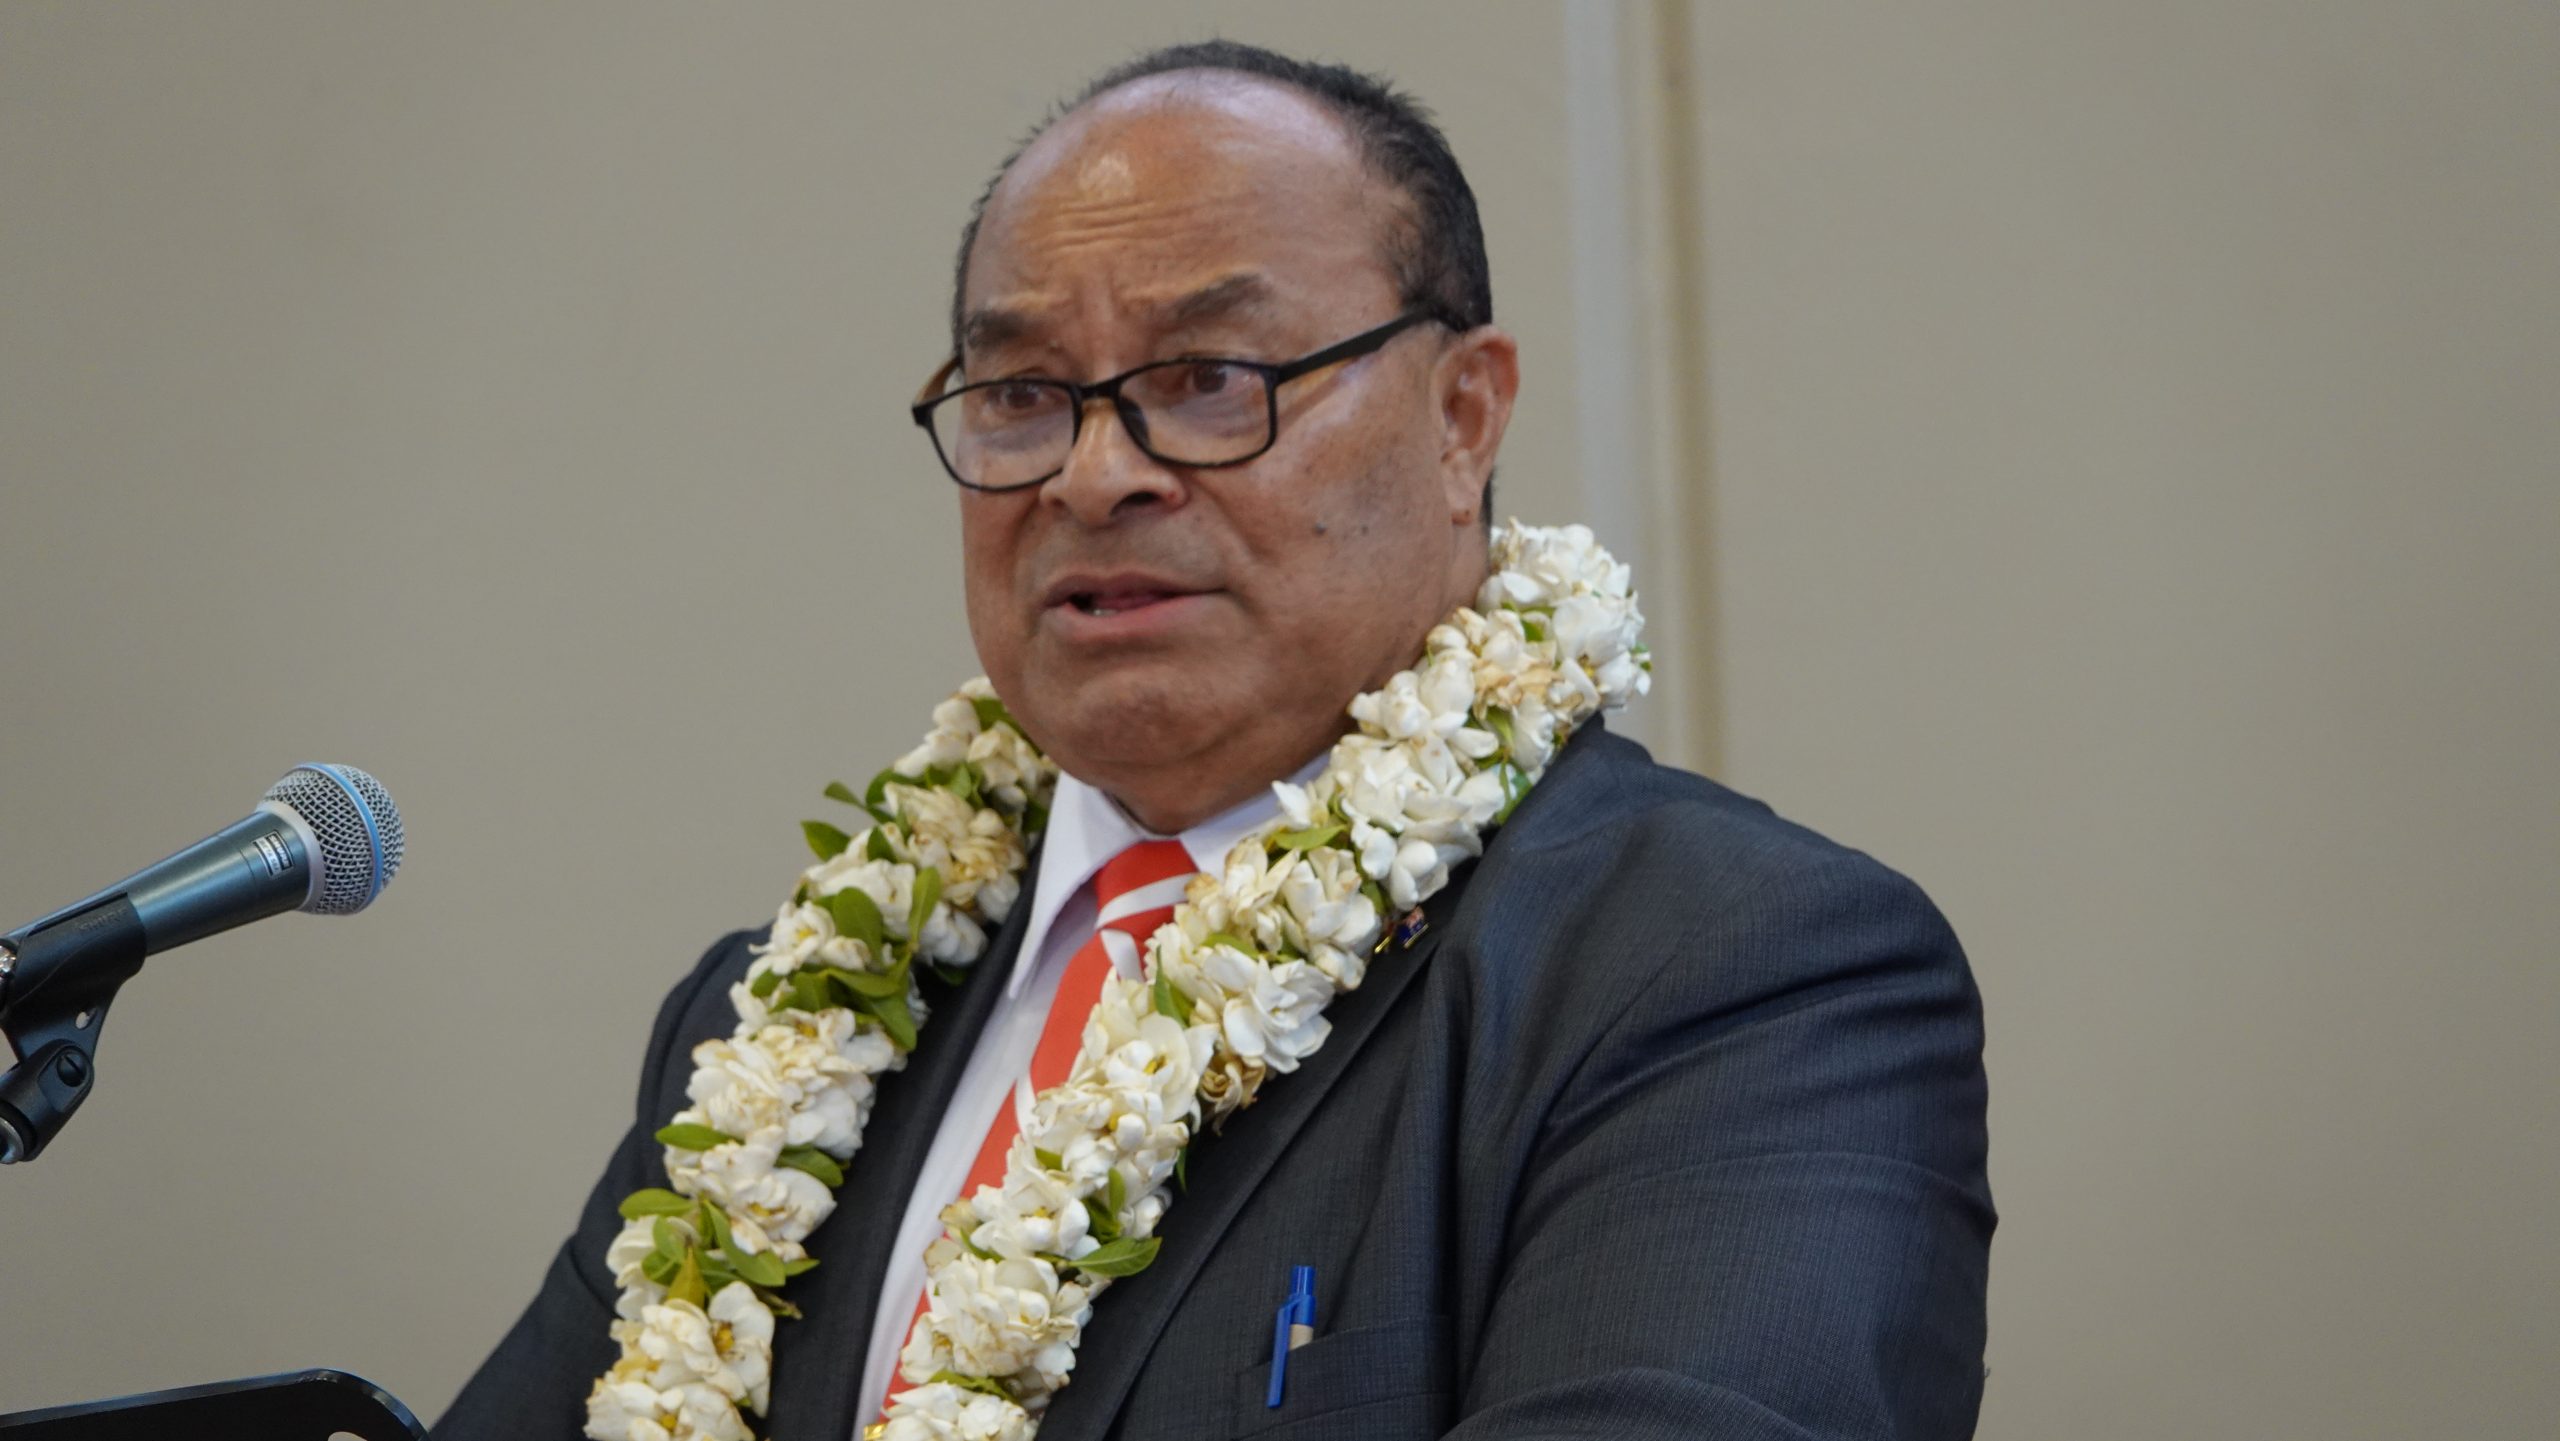 Tonga reports its first COVID-19 case since start of pandemic